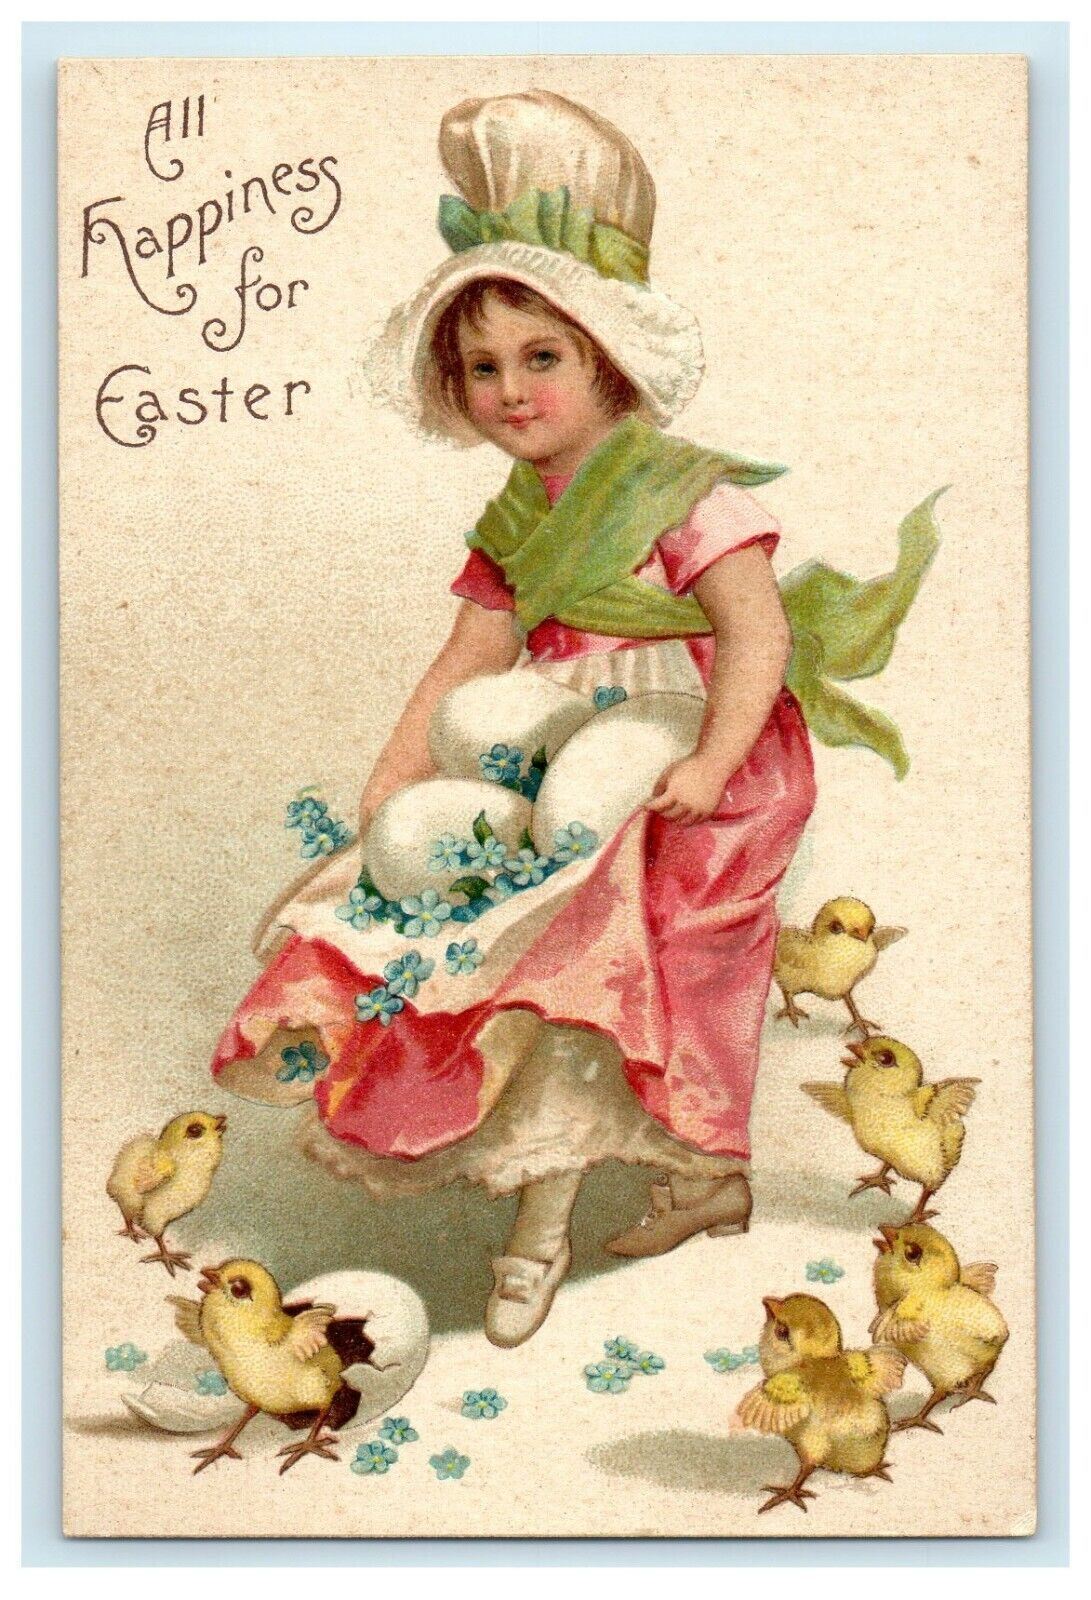 Easter Girl With Eggs Chicks Flowers Clapsaddle Embossed Antique Postcard